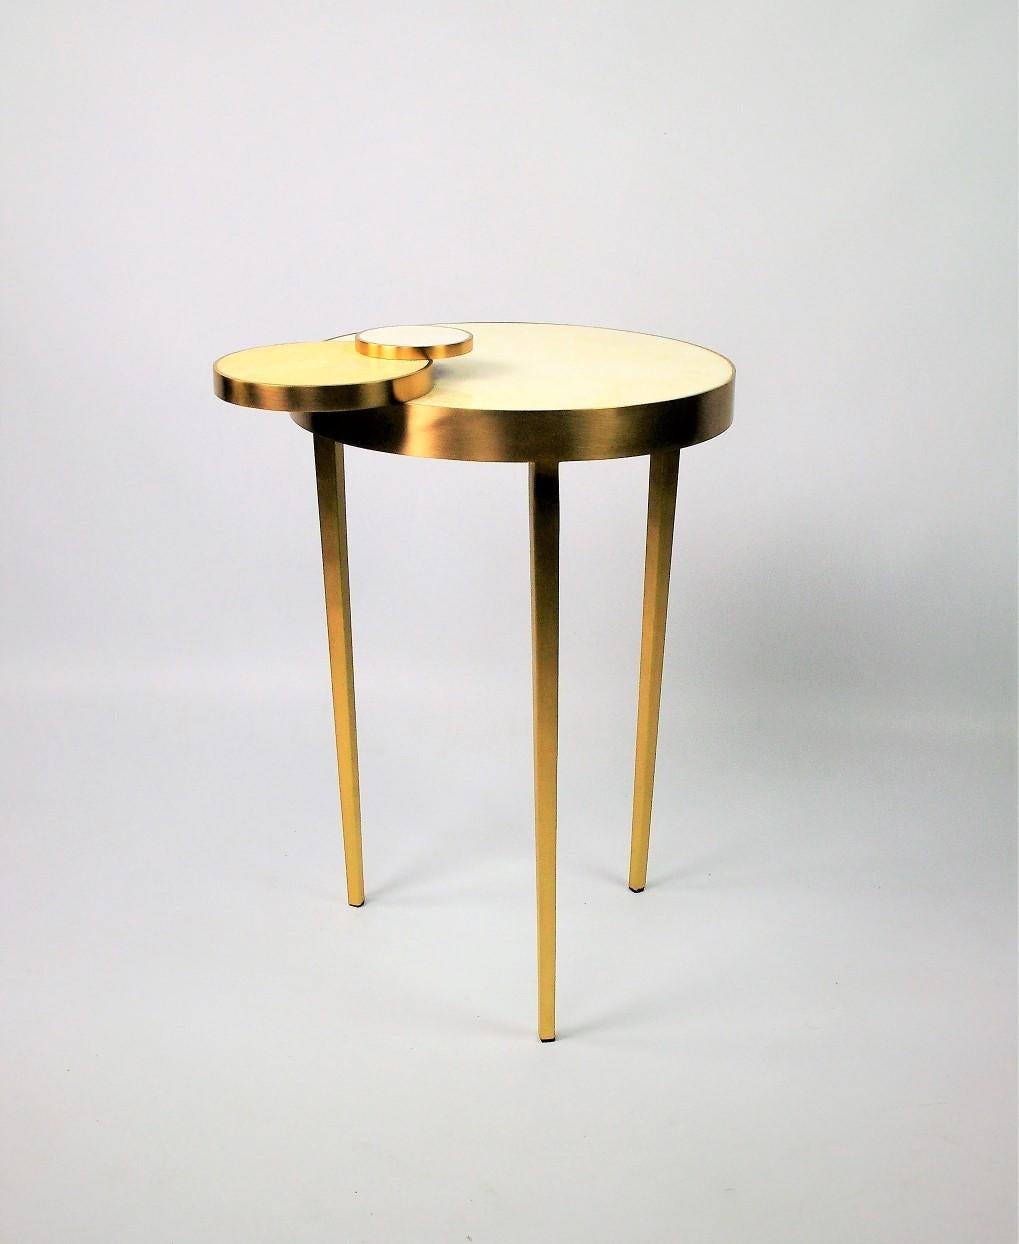 Hand-Crafted Granit and Polished Steel Table by Ginger Brown For Sale